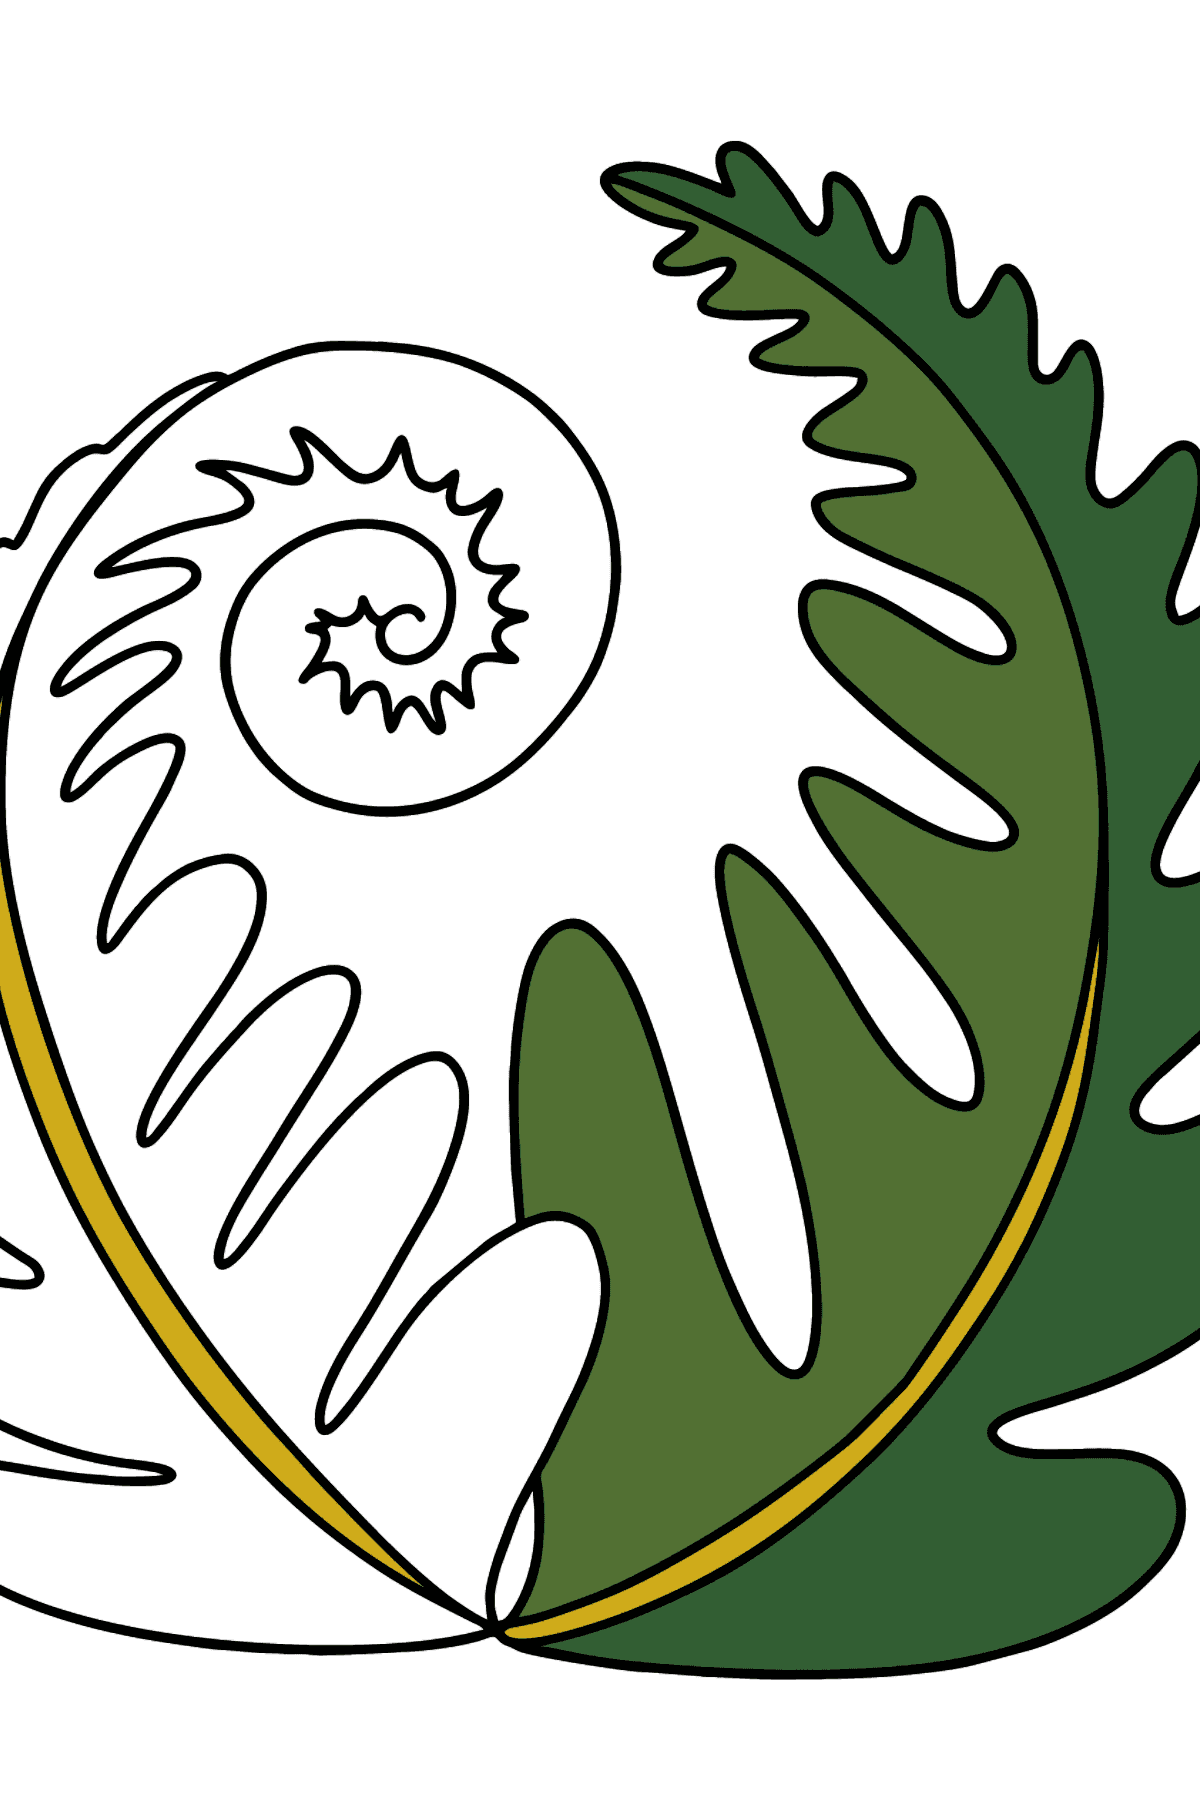 Fern coloring page - Coloring Pages for Kids